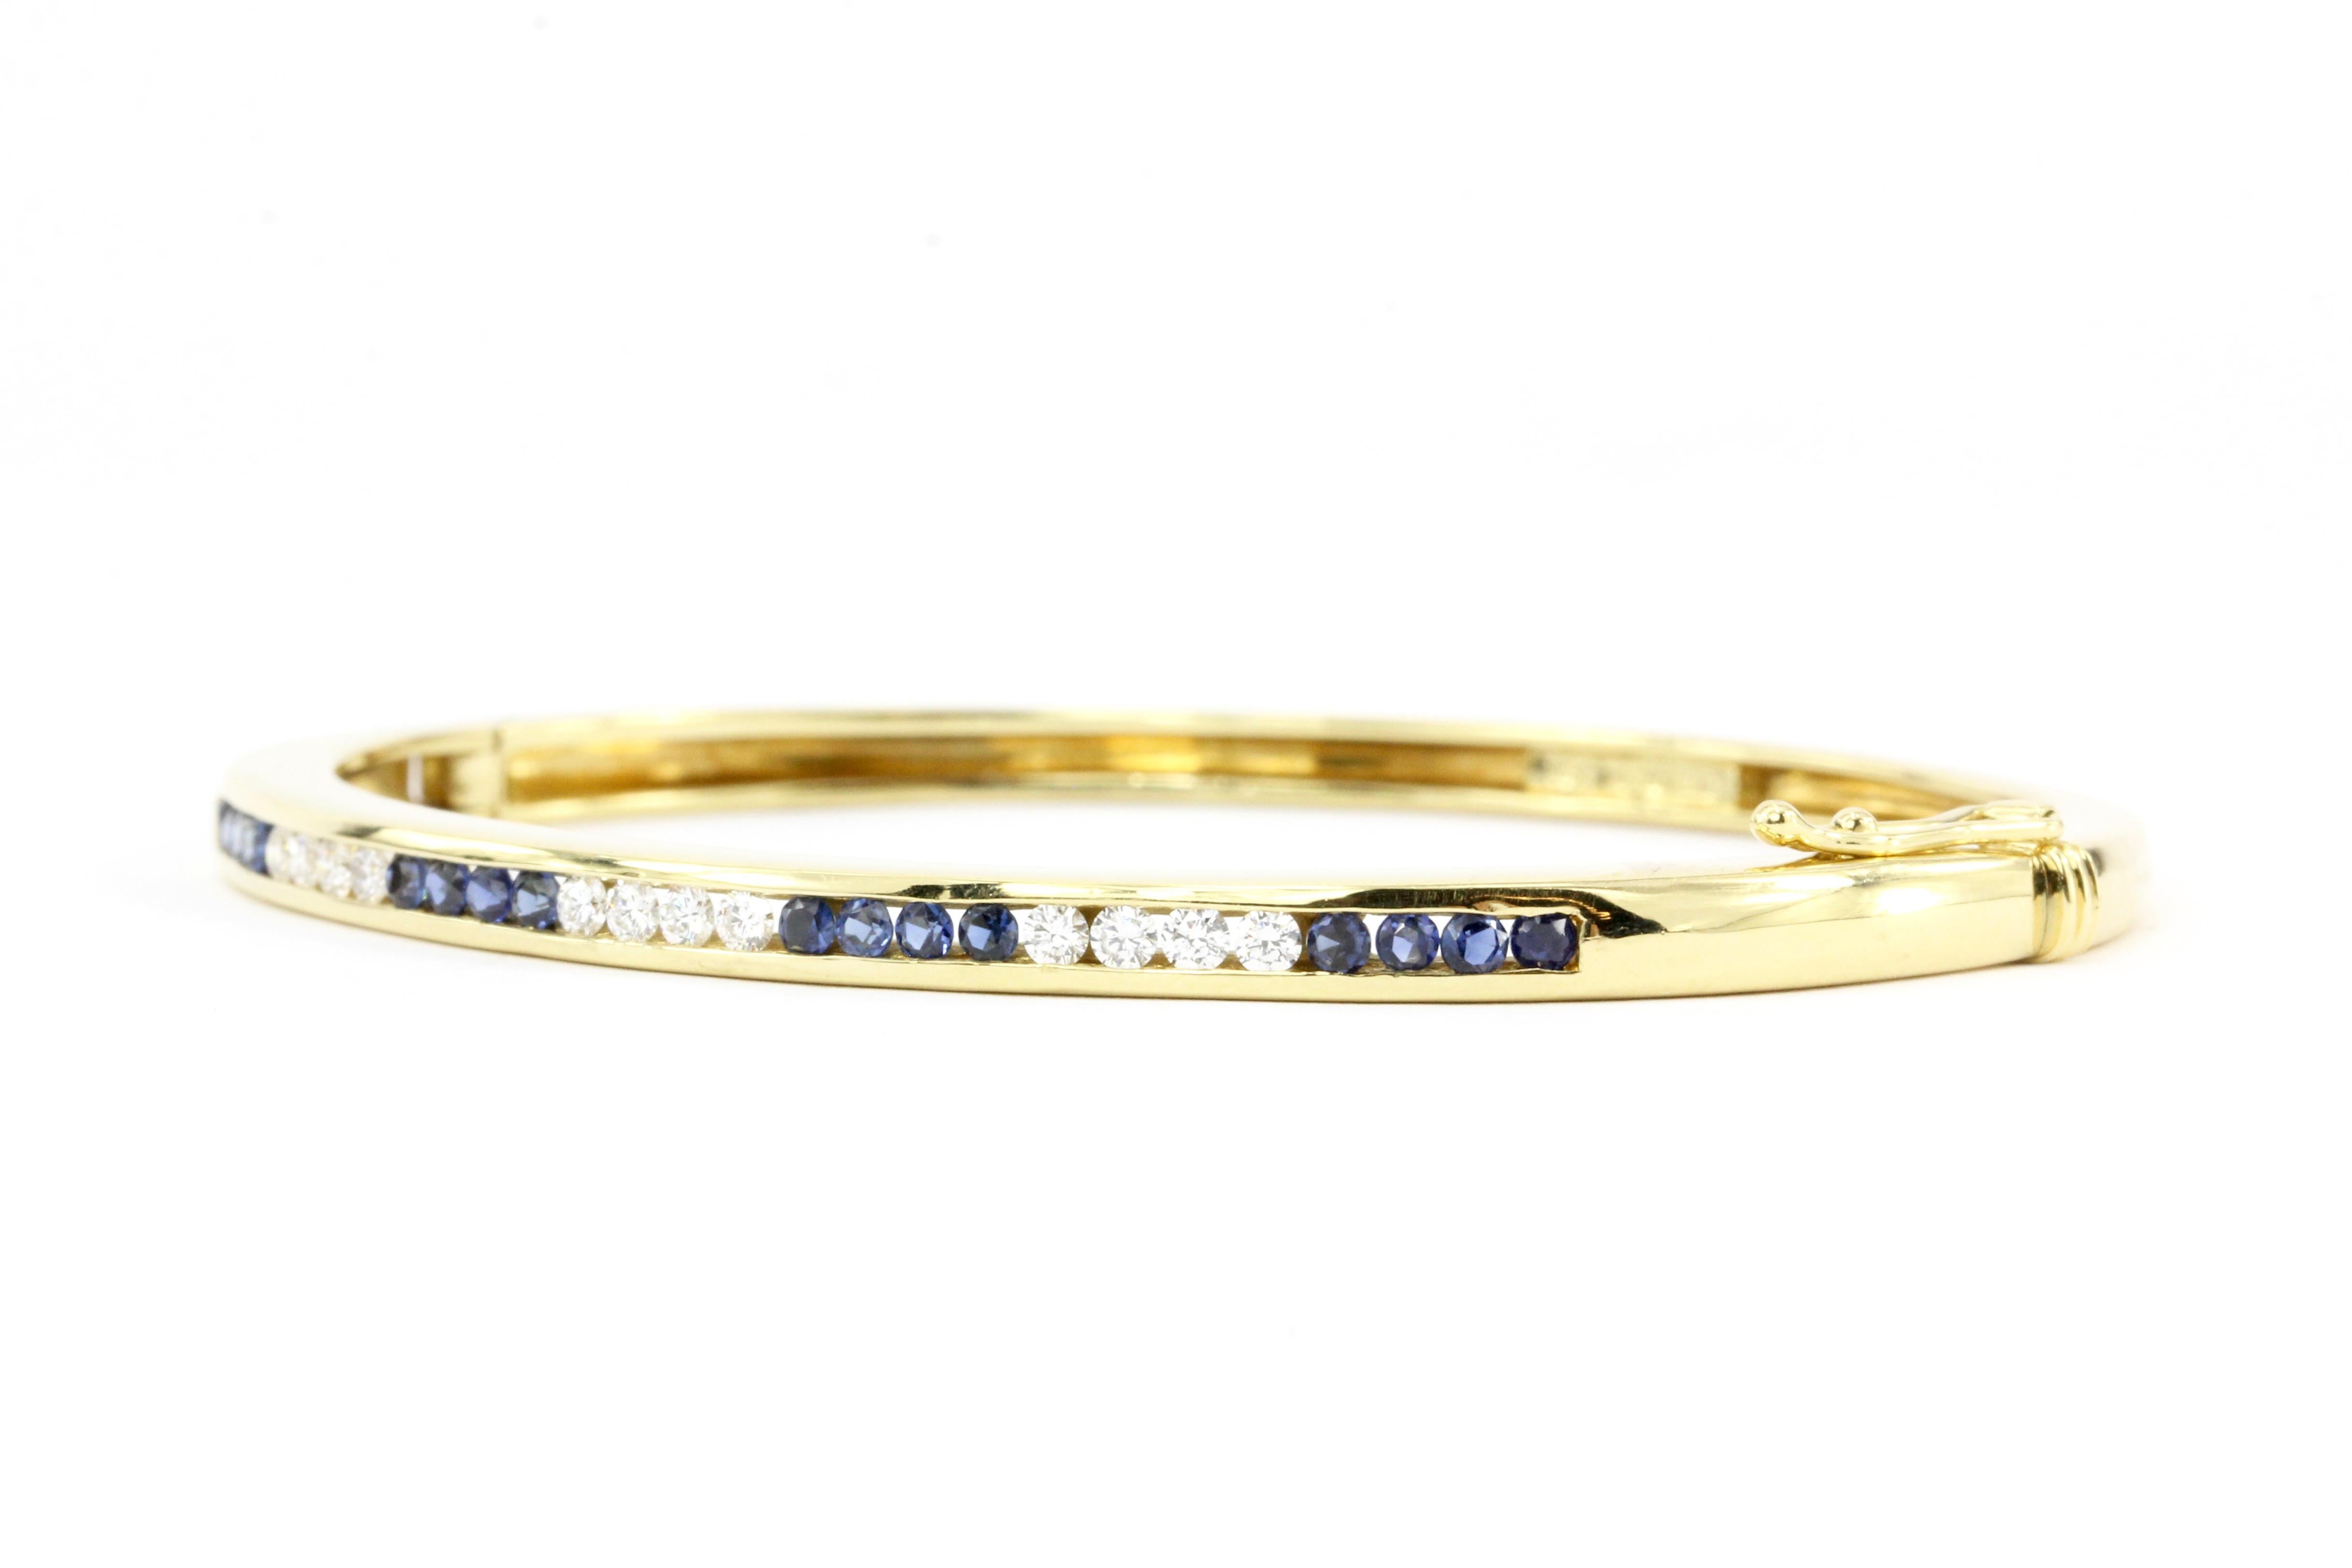 Hallmarks: TIFFANY&CO 750

Composition: 18K Yellow Gold

Primary Stone: Sapphires

Stone Carat: Approximately .5 Carats Total Weight

Shape: Round

Accent Stone: Diamonds

Total Diamond Weight: Approximately .4 carats

Bracelet length: 7.25 inches